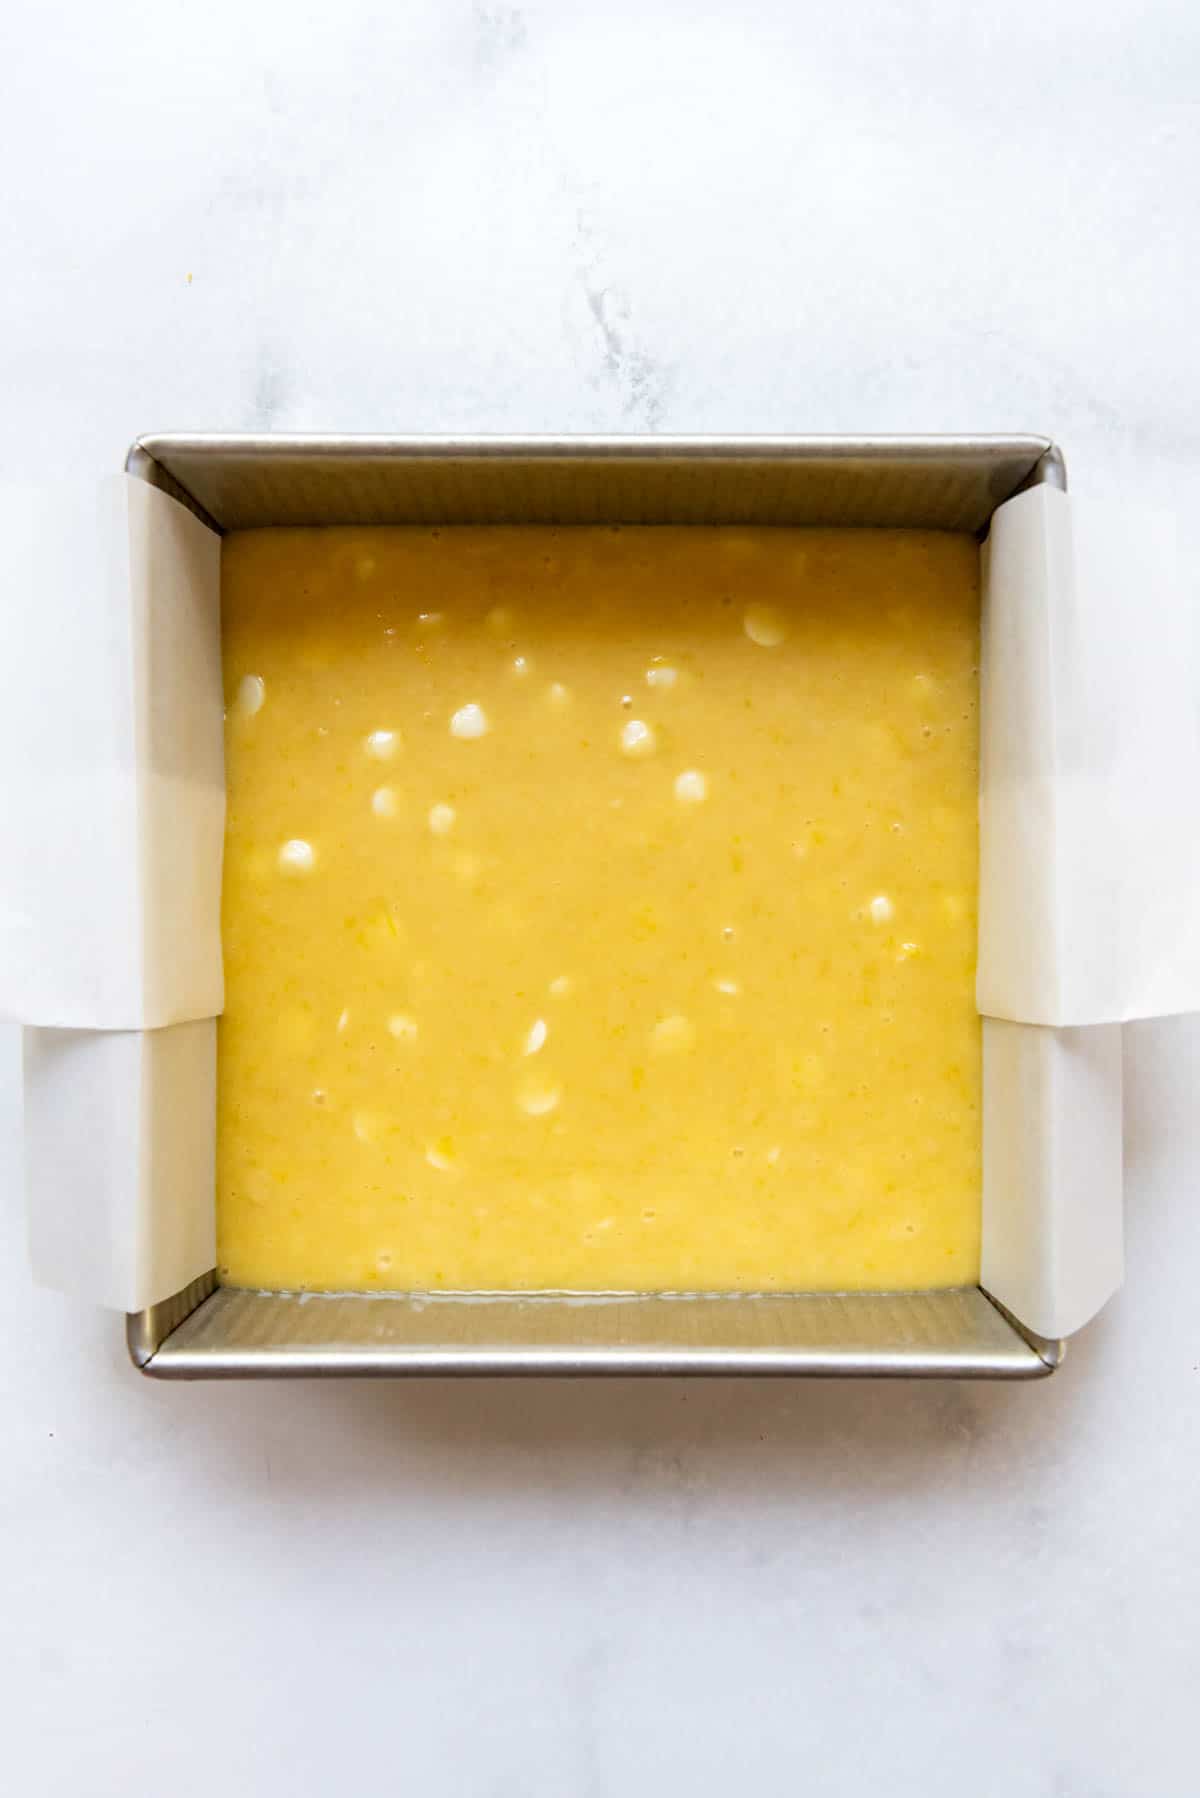 Lemon brownie batter with white chocolate chips in an 8-inch square baking pan lined with a parchment paper sling.